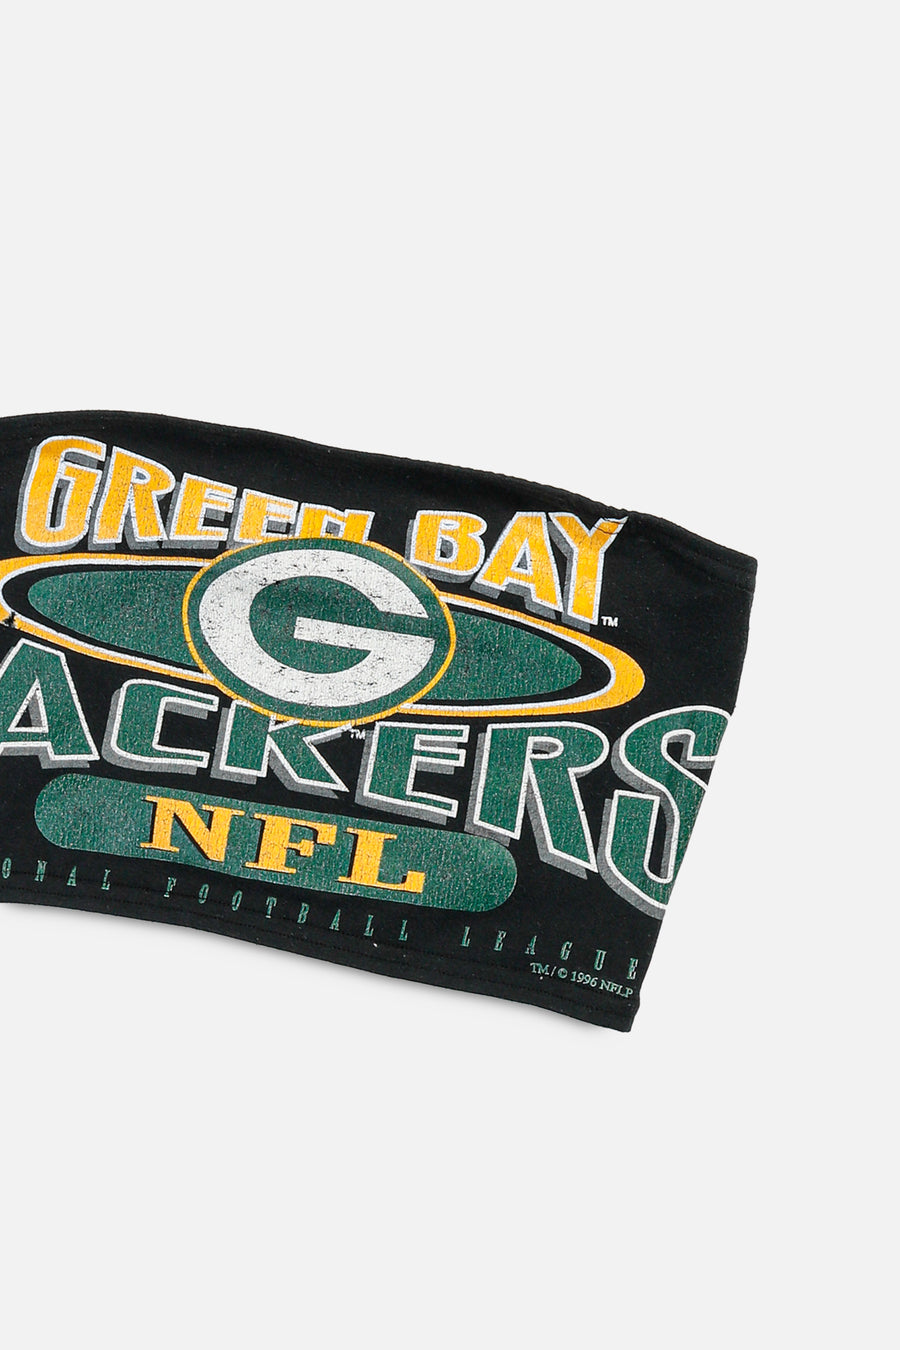 Rework Green Bay Packers NFL Bandeau - M